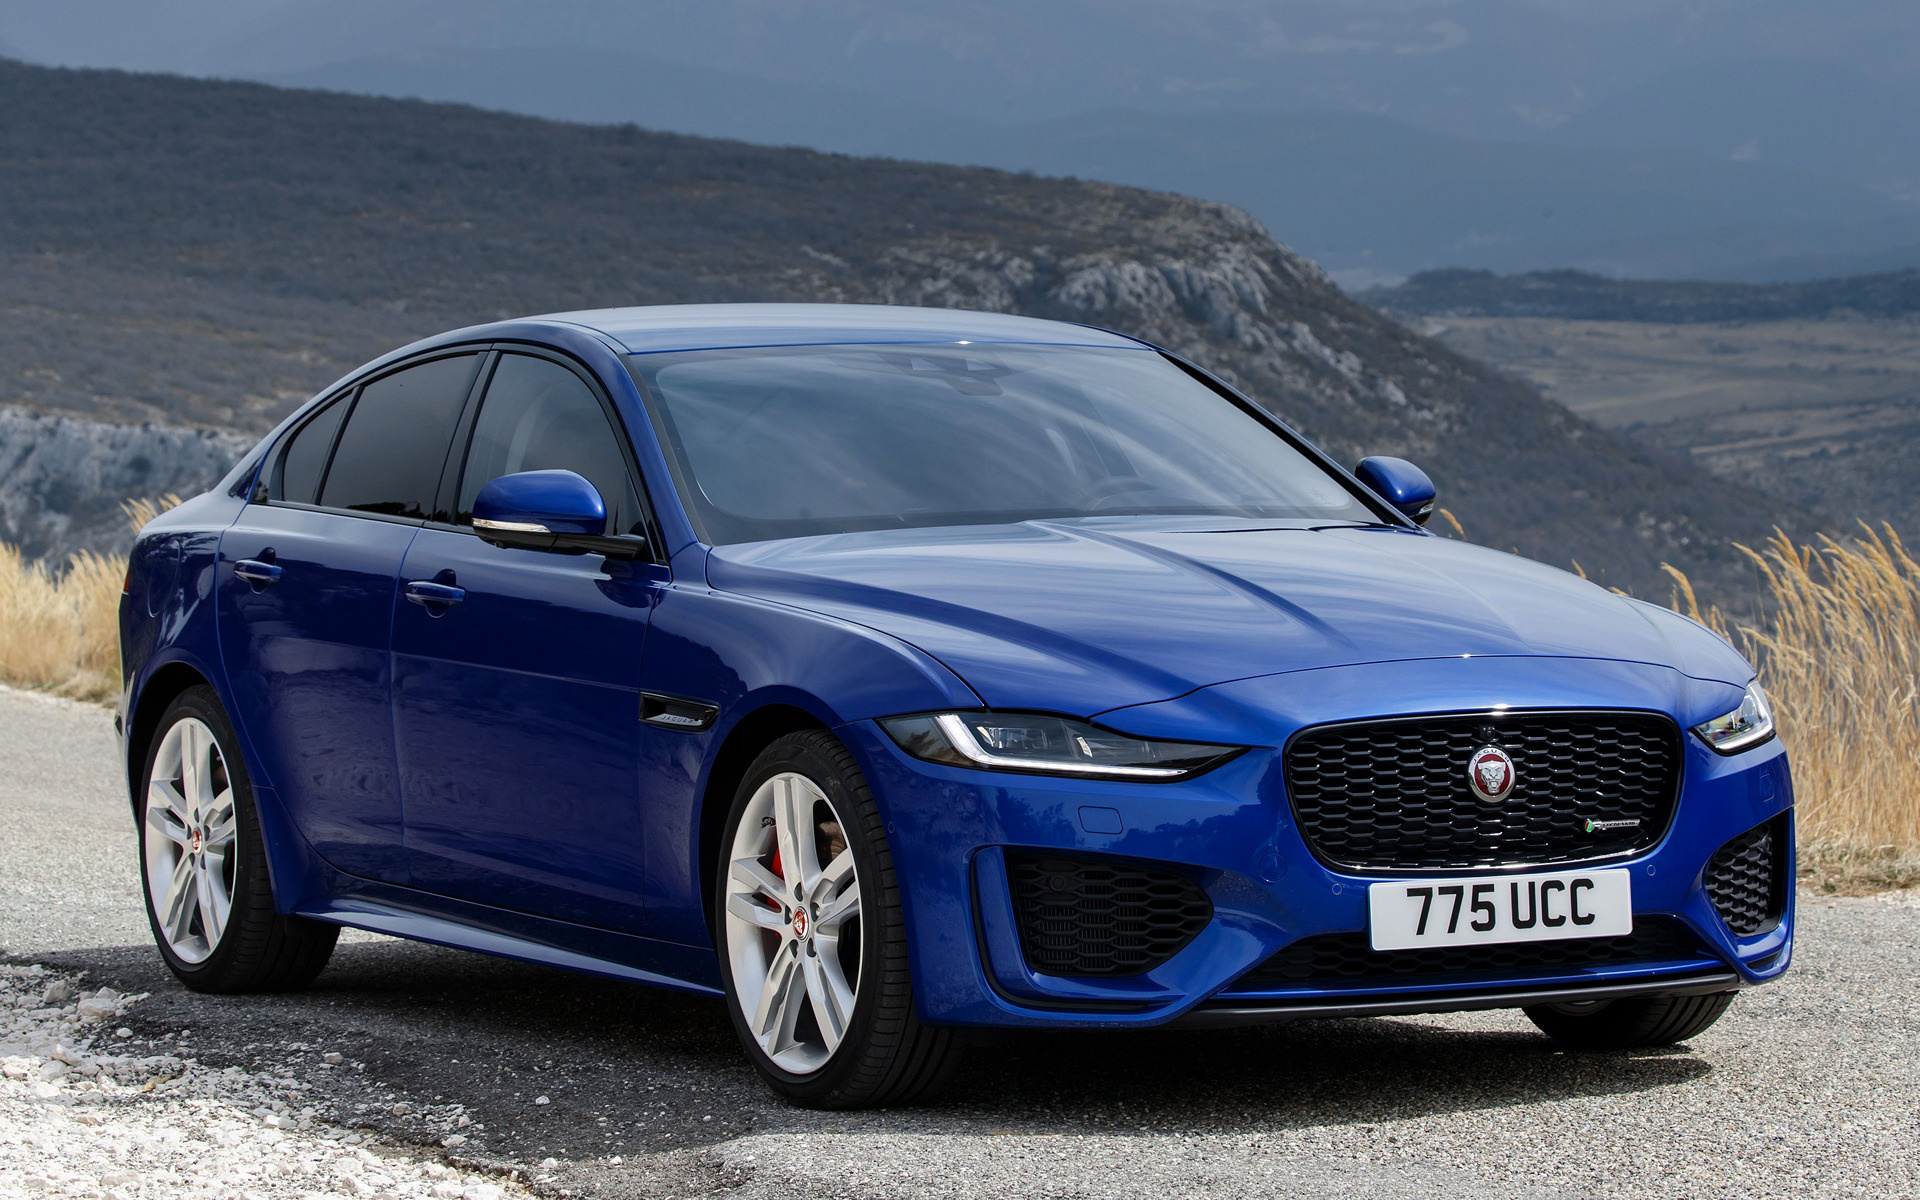 2019 Jaguar XE R-Dynamic - Wallpapers and HD Images | Car ...